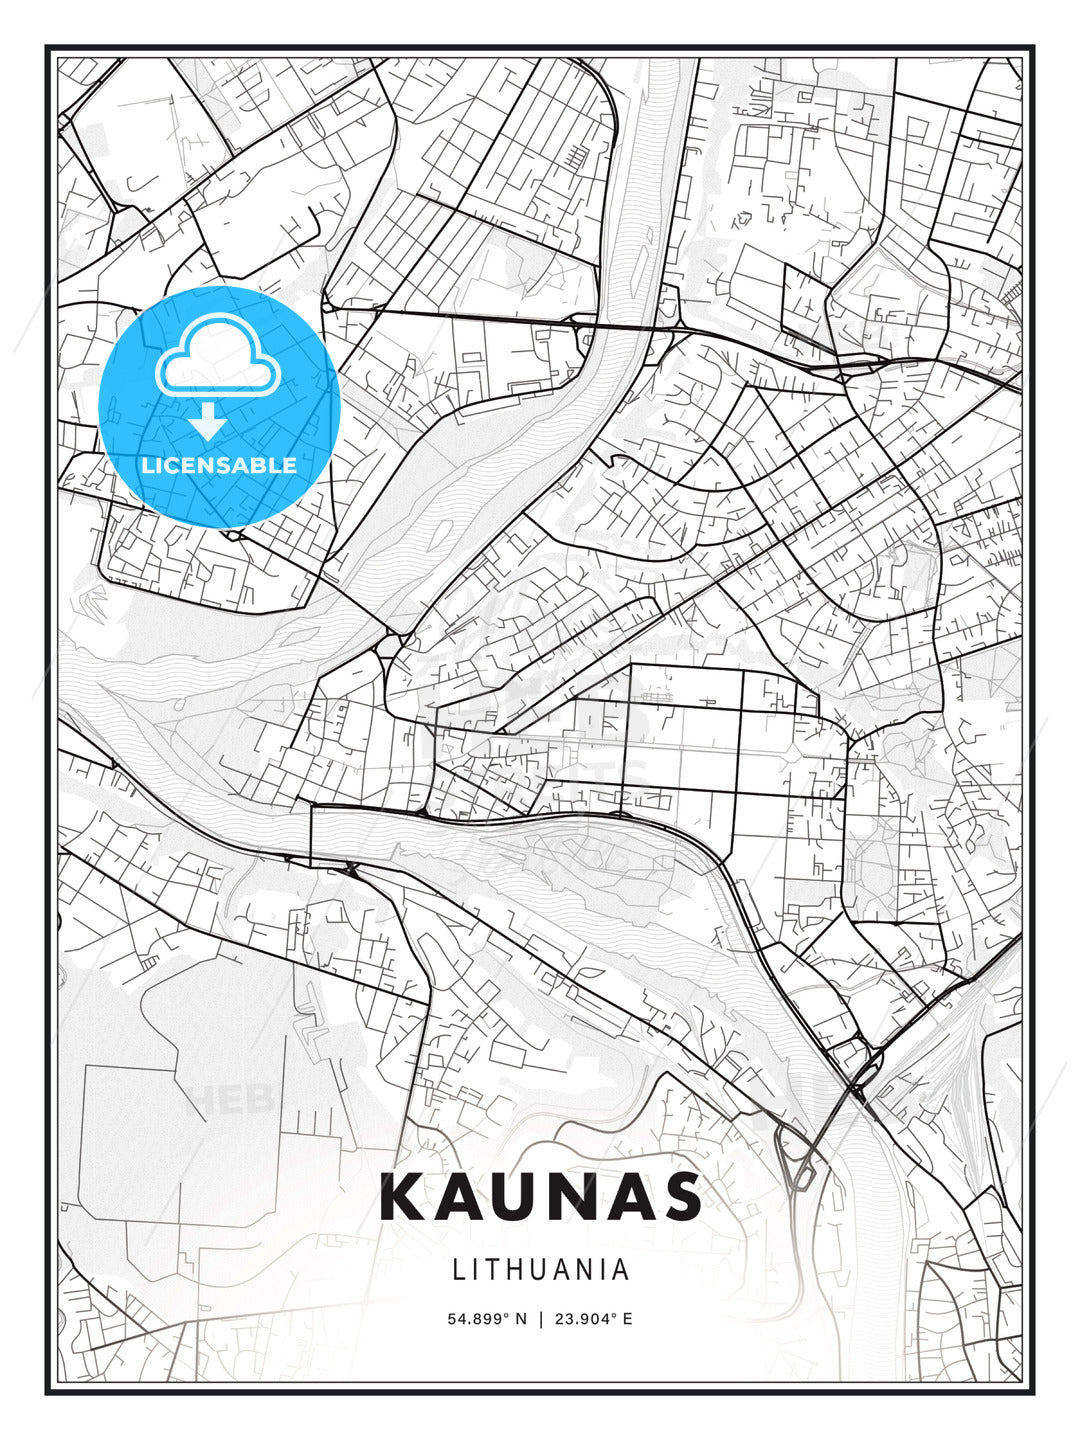 Kaunas, Lithuania, Modern Print Template in Various Formats - HEBSTREITS Sketches